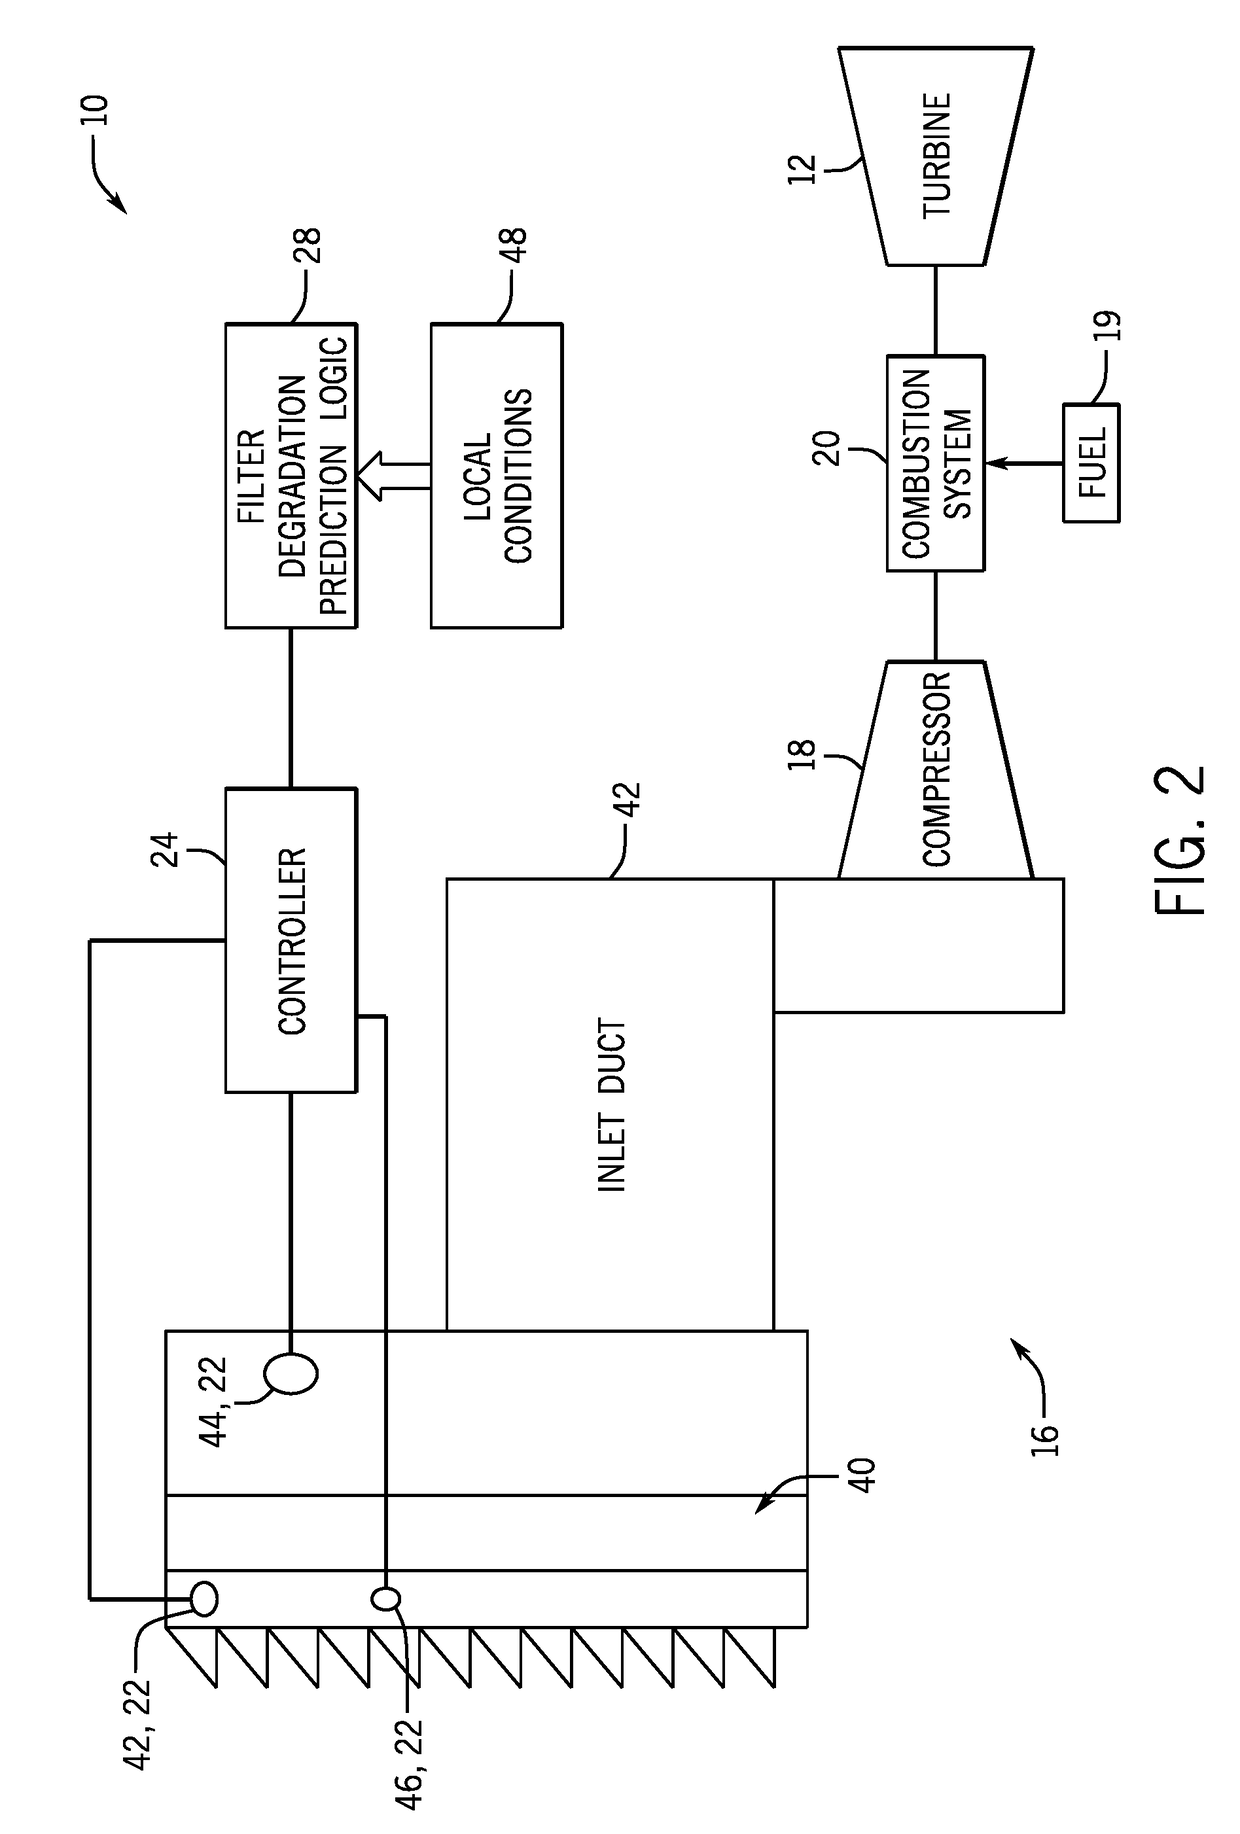 System and method for condition-based monitoring of turbine filters